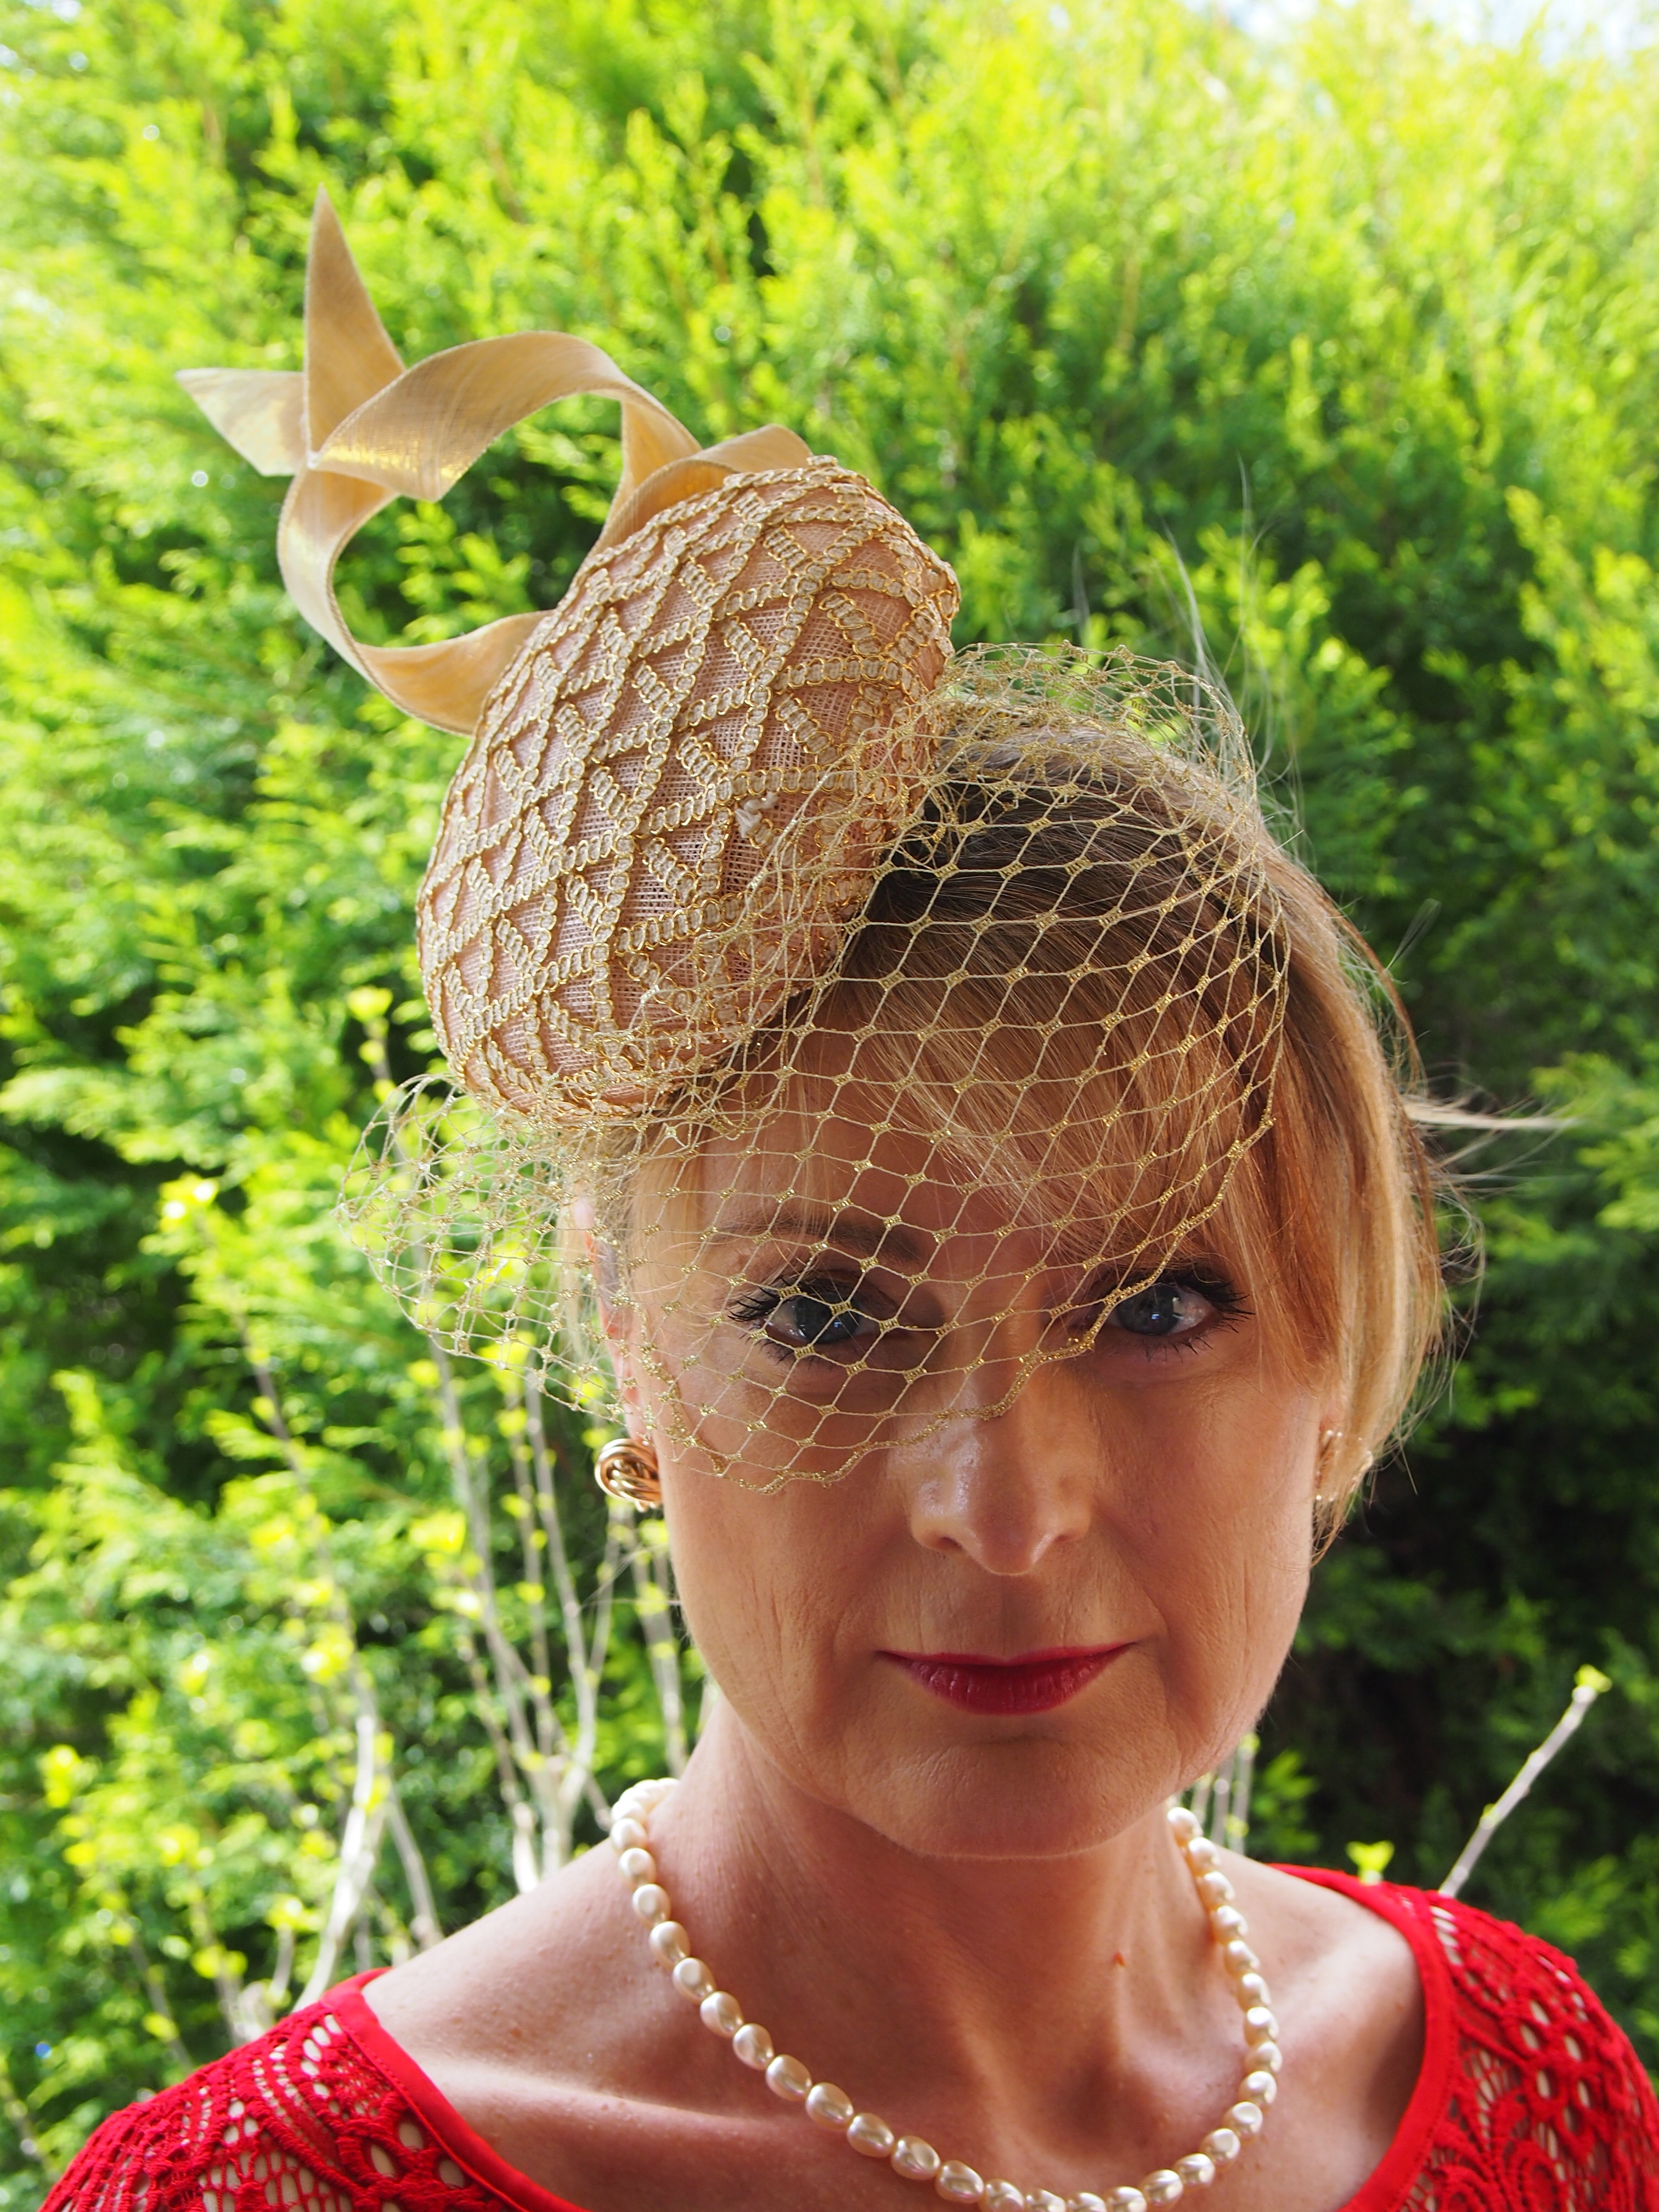 Gold Button with Siminary Twirls and Lace Fascinator $385